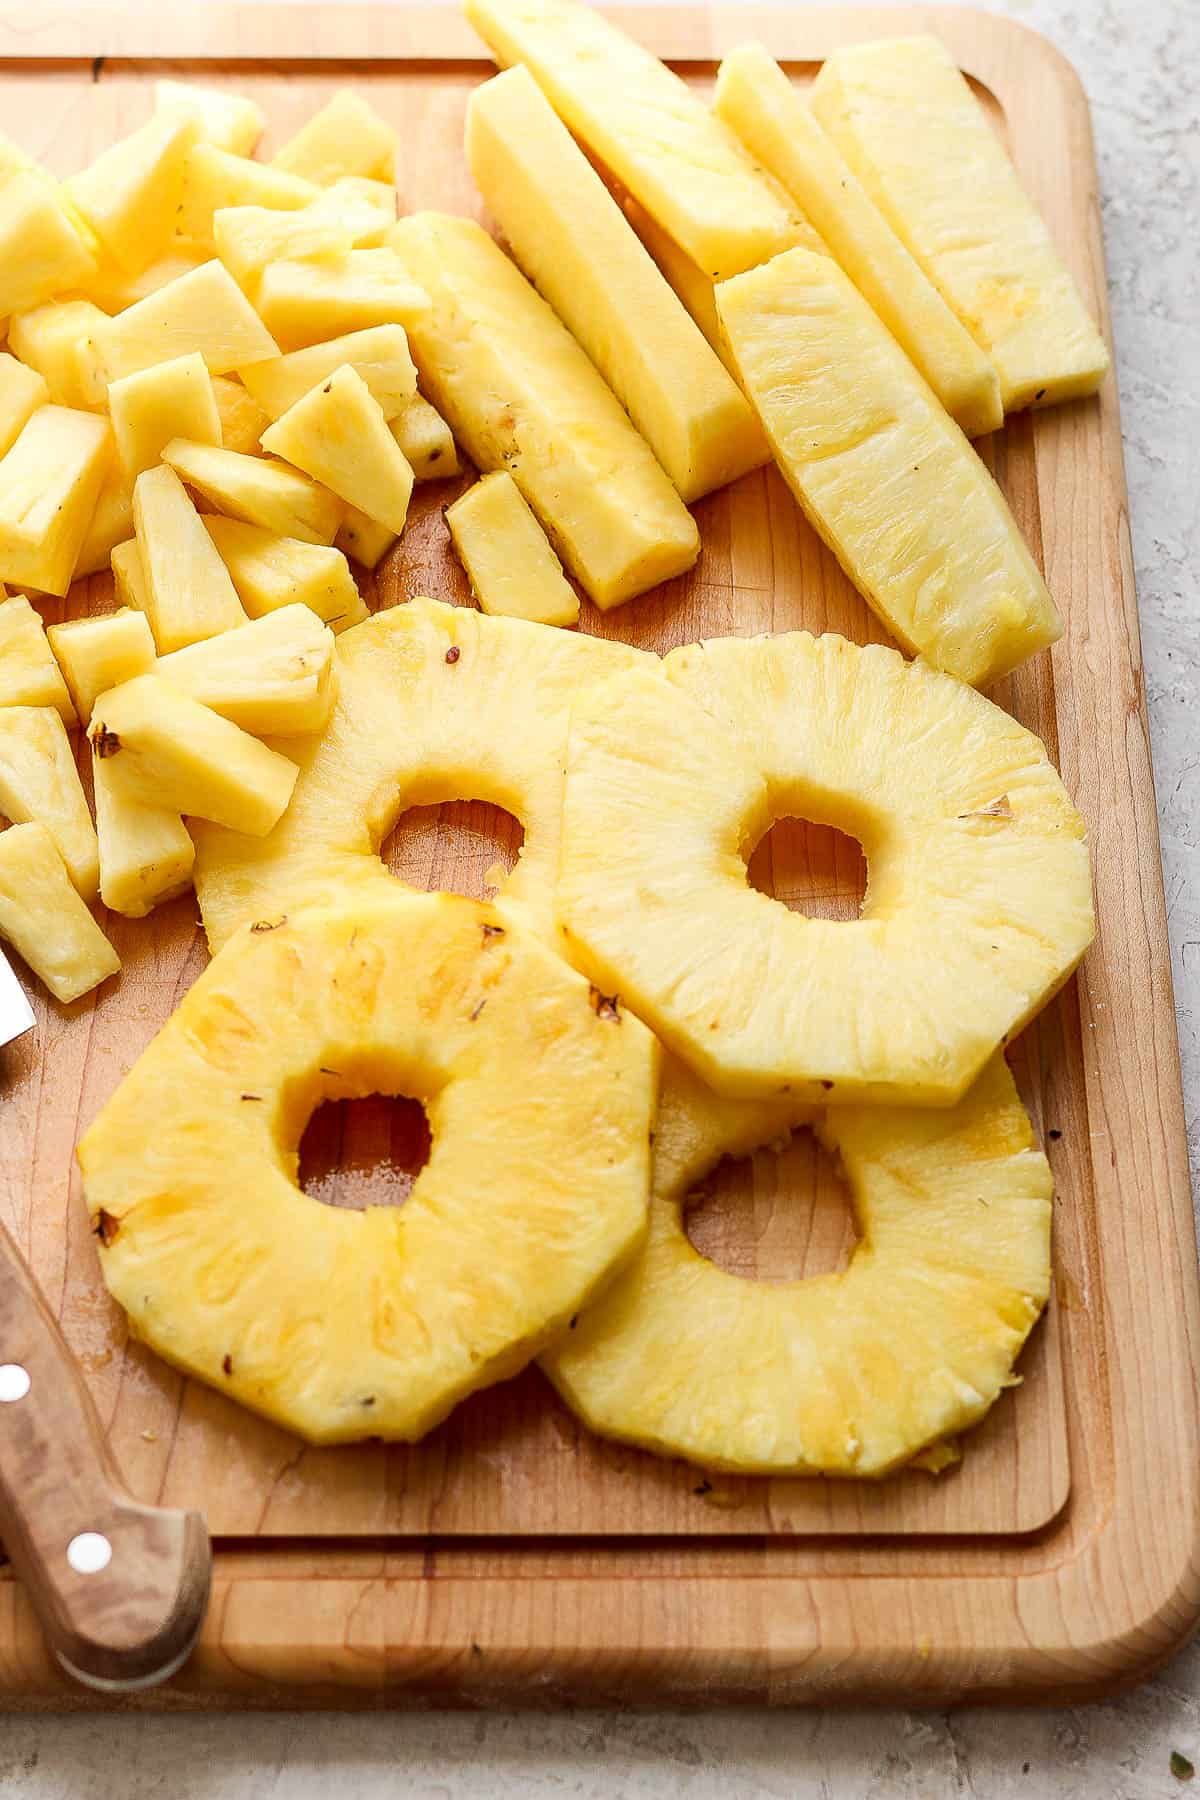 Pineapple rounds, strips, and chunks on a wooden cutting board.